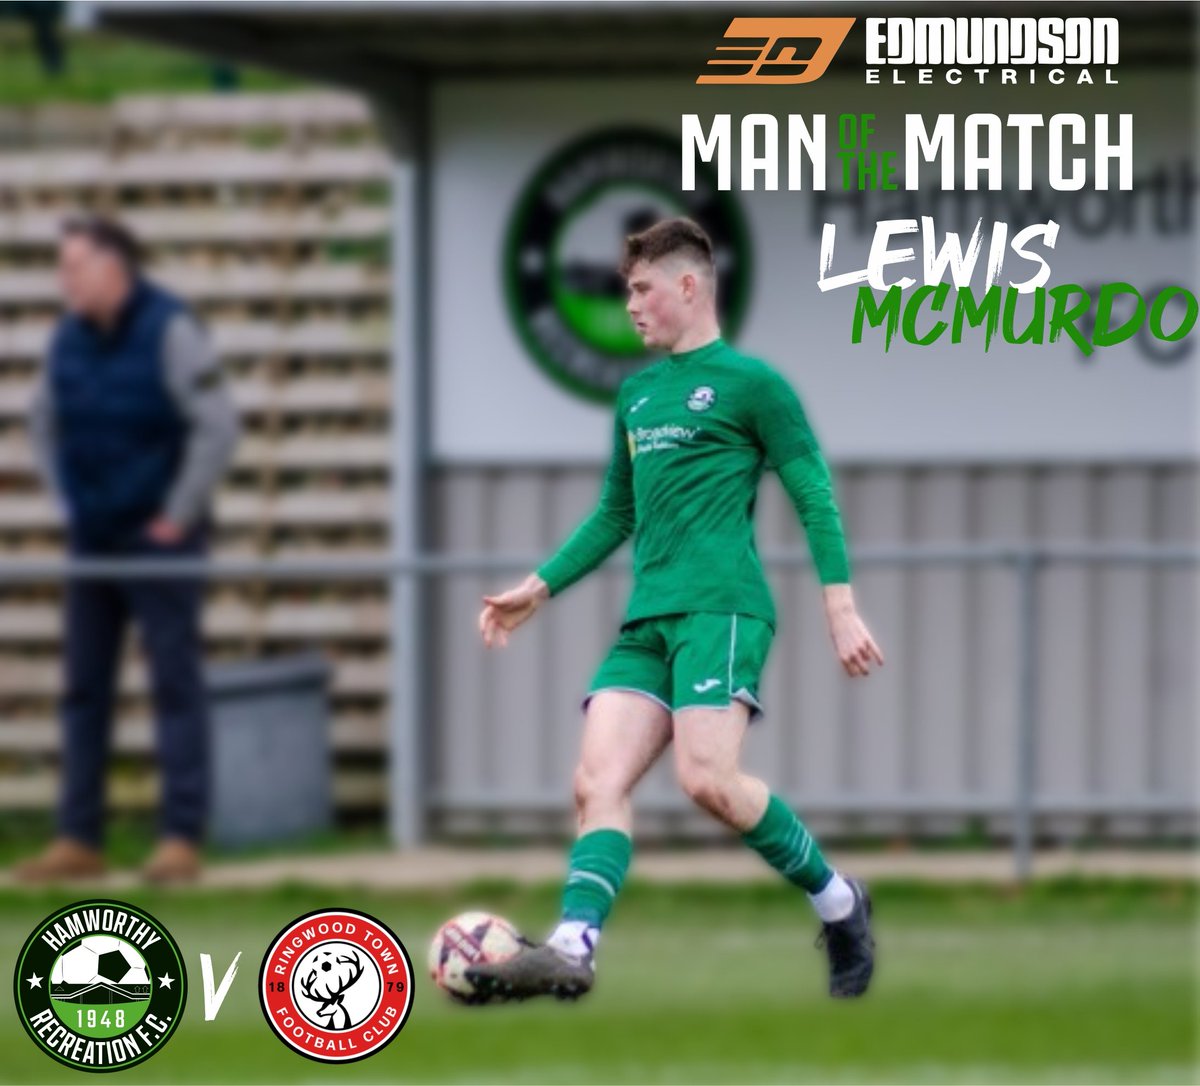 Last night's Edmundson Electrical Man of the Match went to Lewis McMurdo. Lewis is sponsored by The Hamworthy Club. #UpTheRec